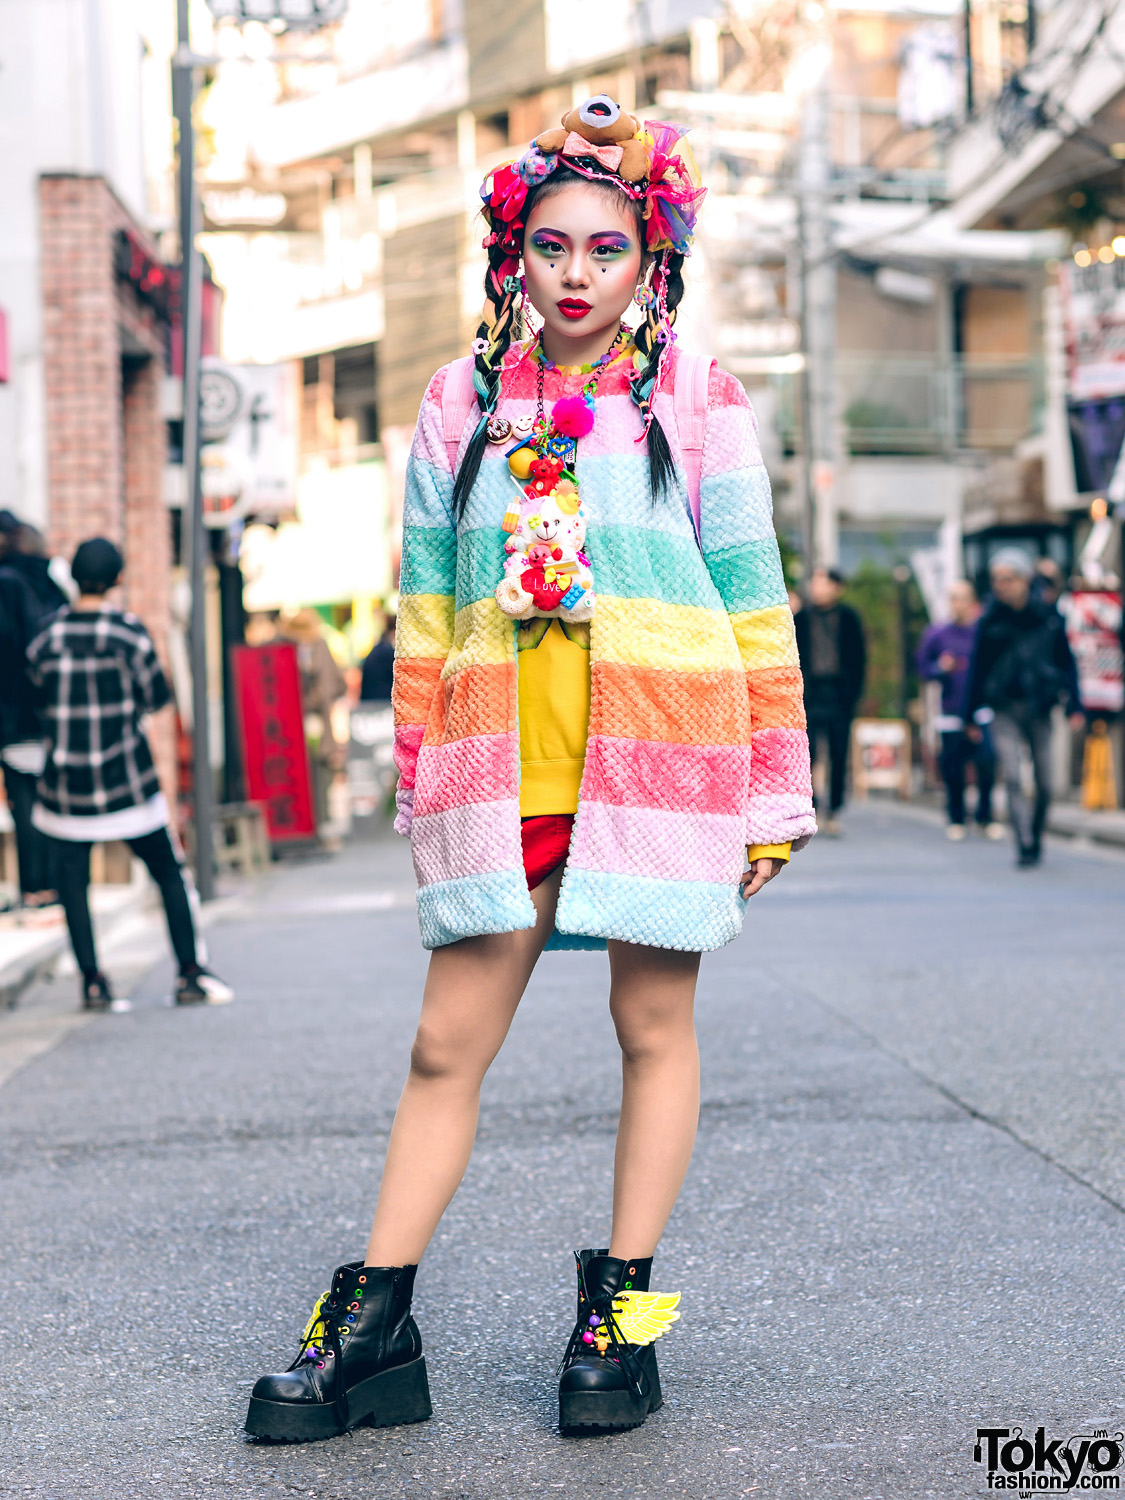 Japanese Kawaii Street Style w/ Colorful Bear Headpiece, Galaxxxy Pastel Rainbow Jacket, Teenstyle, Forever21, WEGO Wing Boots, Claire's Unicorn Backpack, Handmade Accessories & Bold Makeup